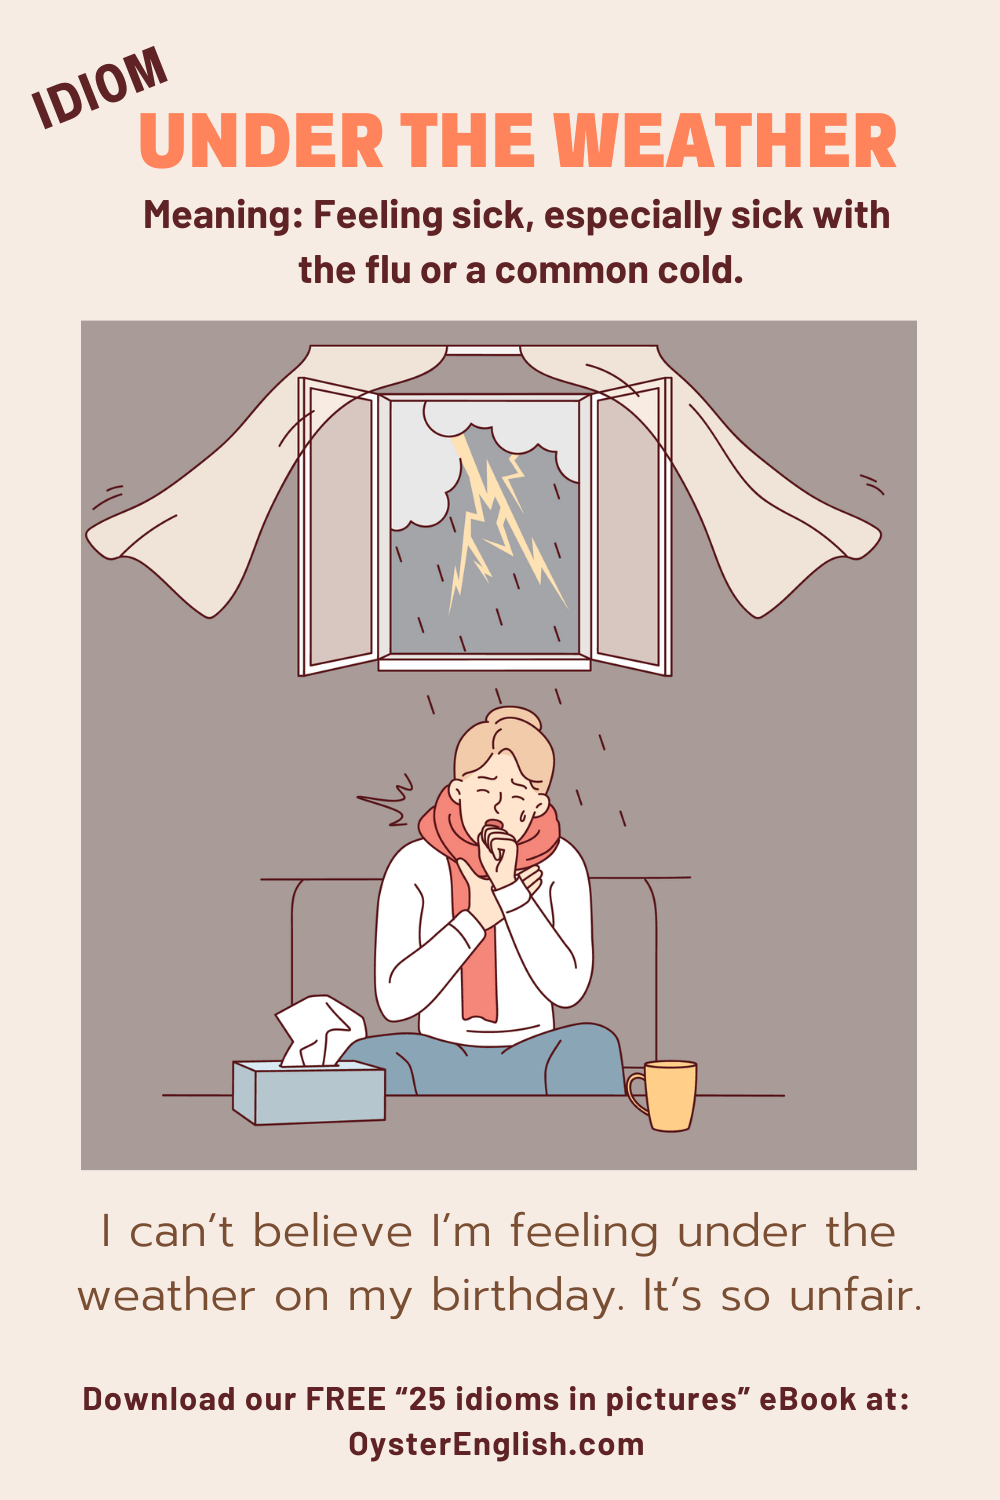 idiom under the weather